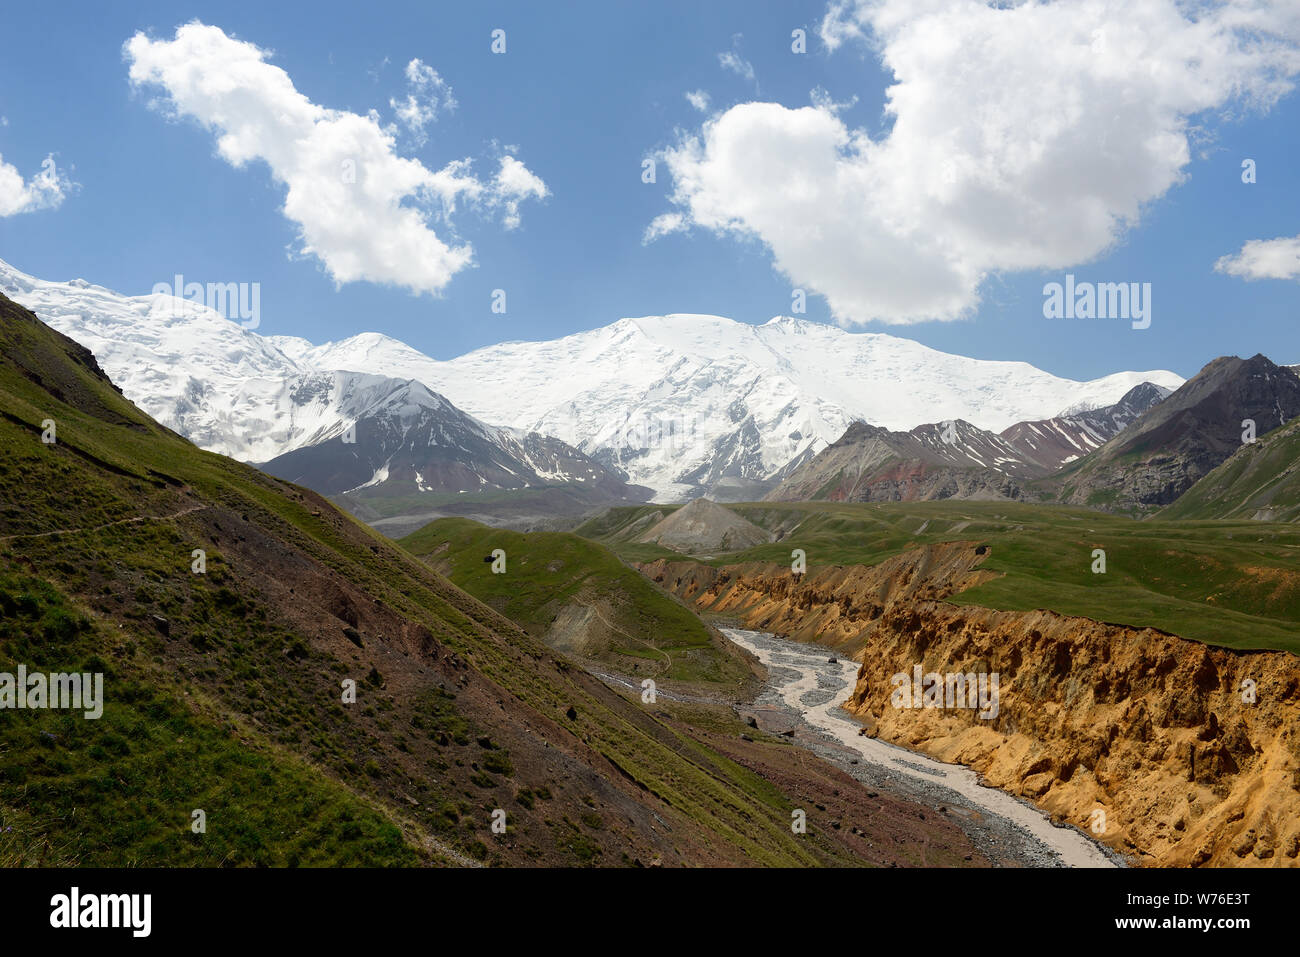 The beautiful Pamir mountains, trekking destination. View on the Lenin Peak and river, Kyrgyzstan, Central Asia. Stock Photo